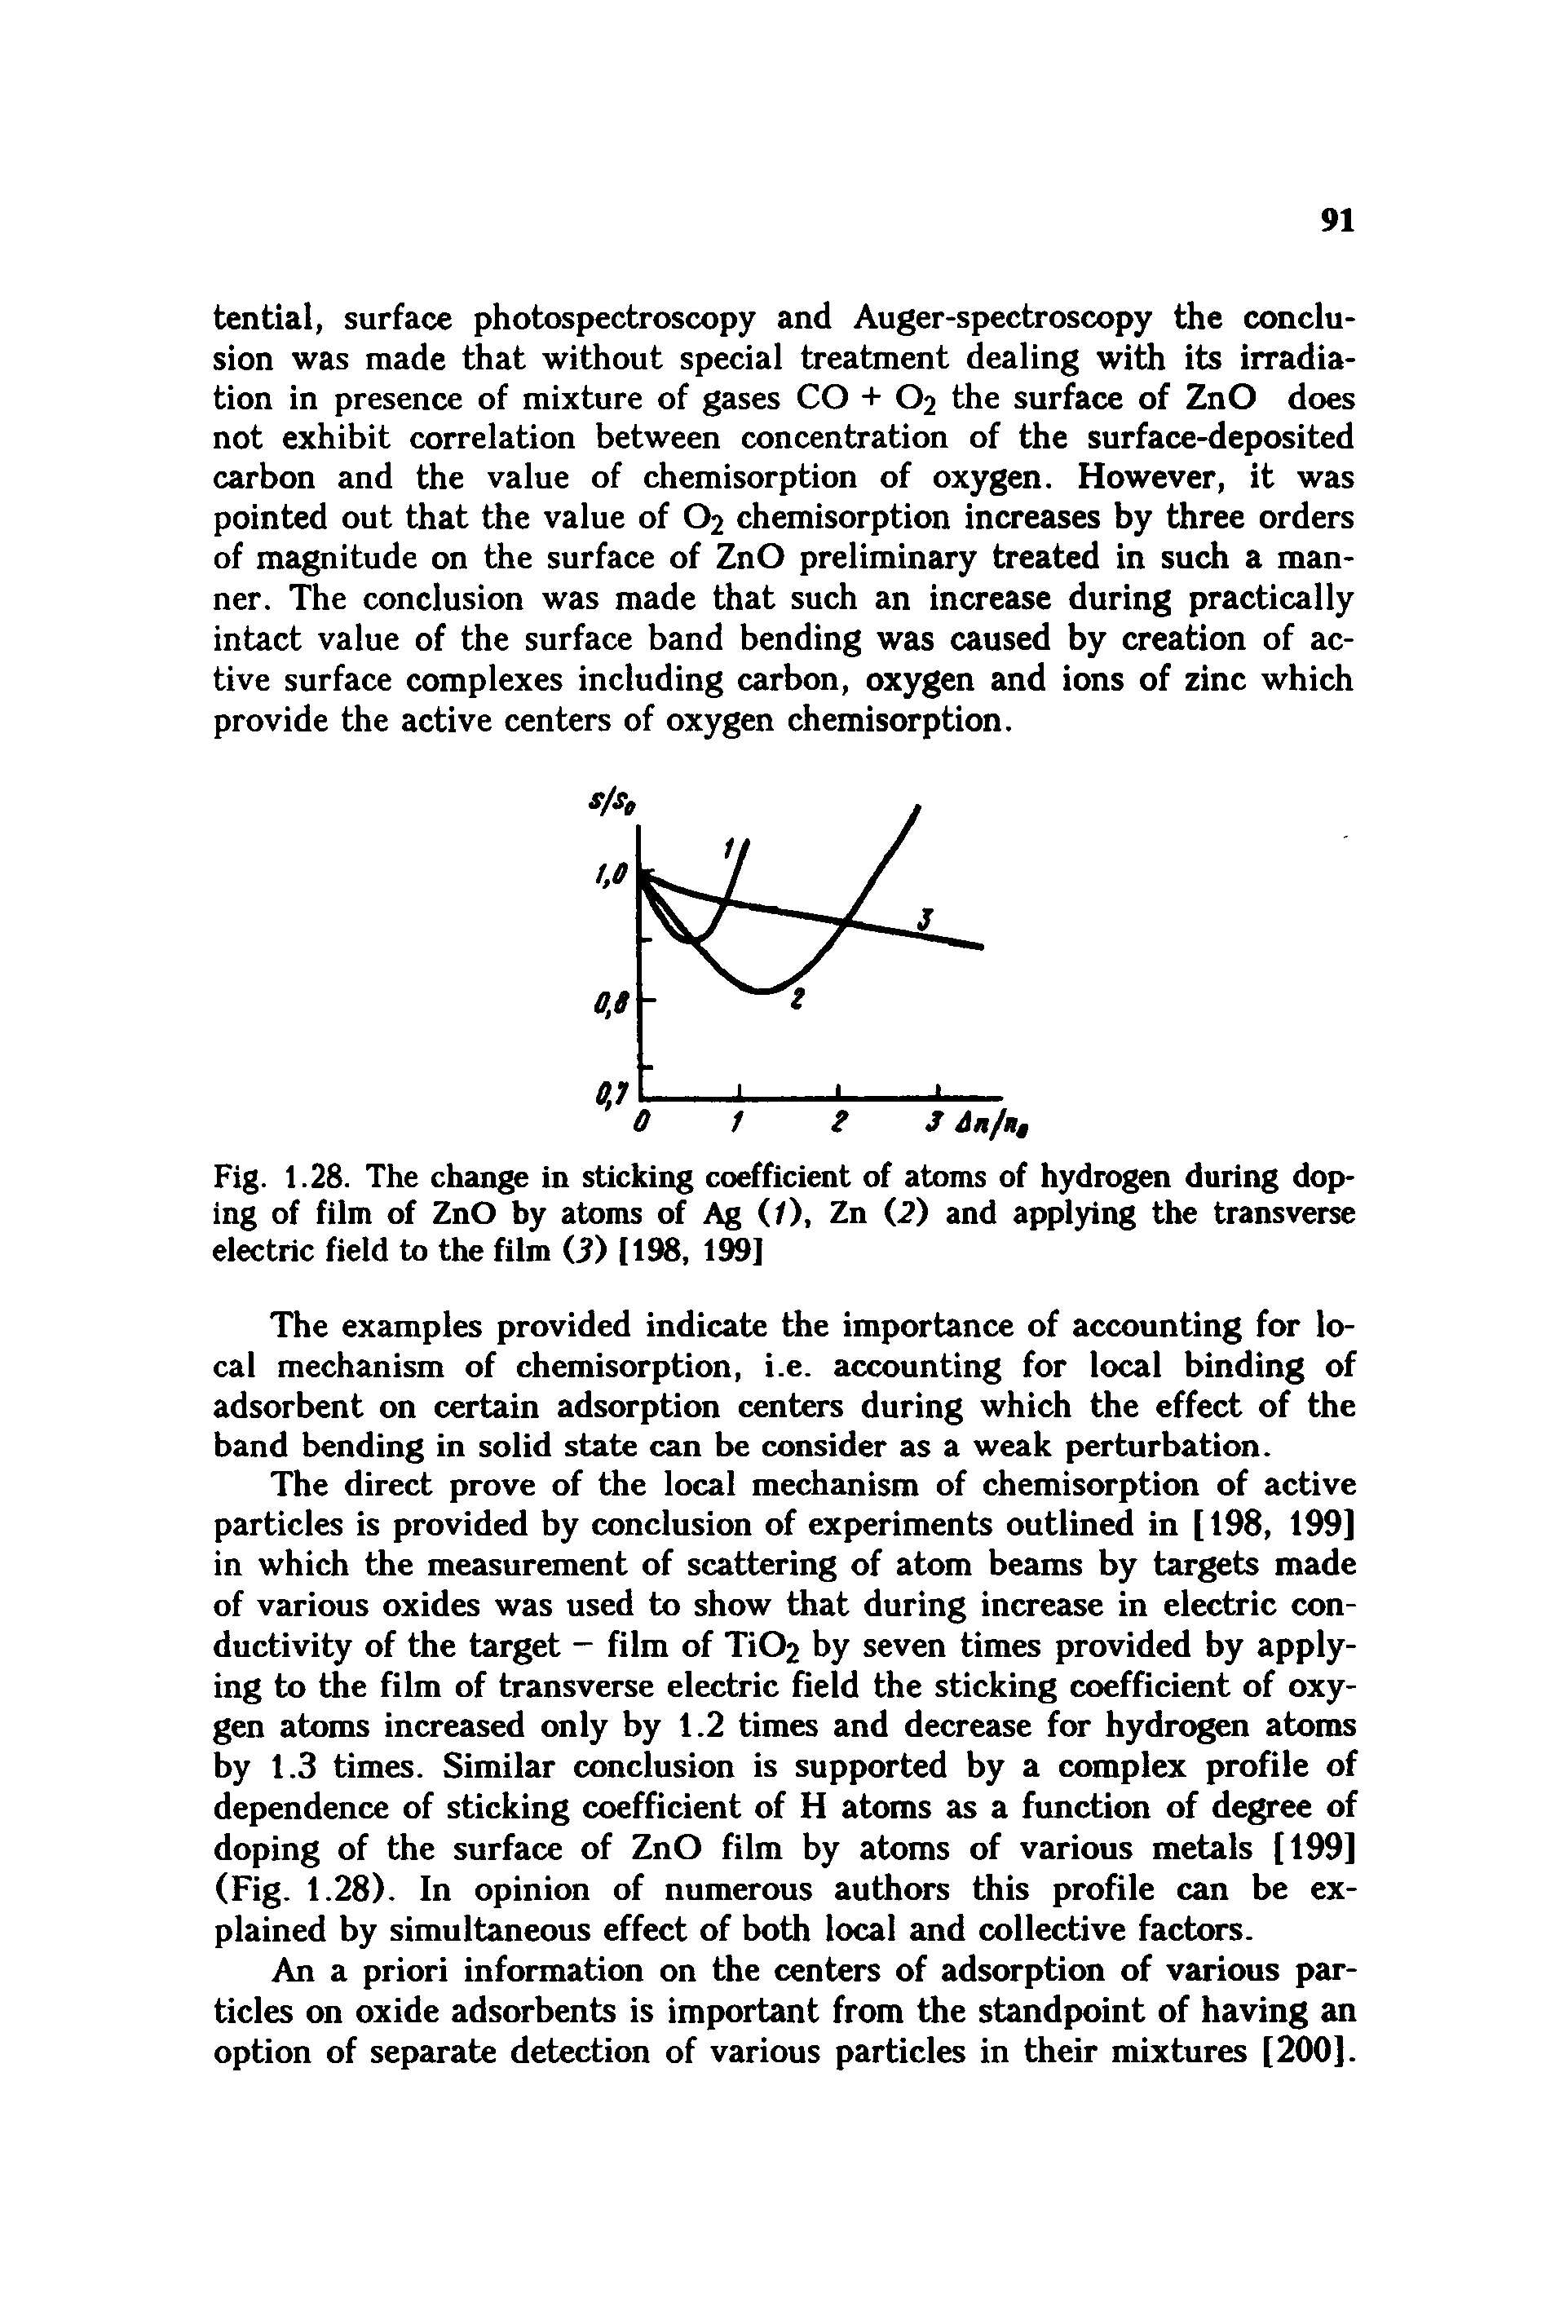 Fig. 1.28. The change in sticking coefficient of atoms of hydrogen during doping of film of ZnO by atoms of Ag (/), Zn (2) and applying the transverse electric field to the film O) [198, 199]...